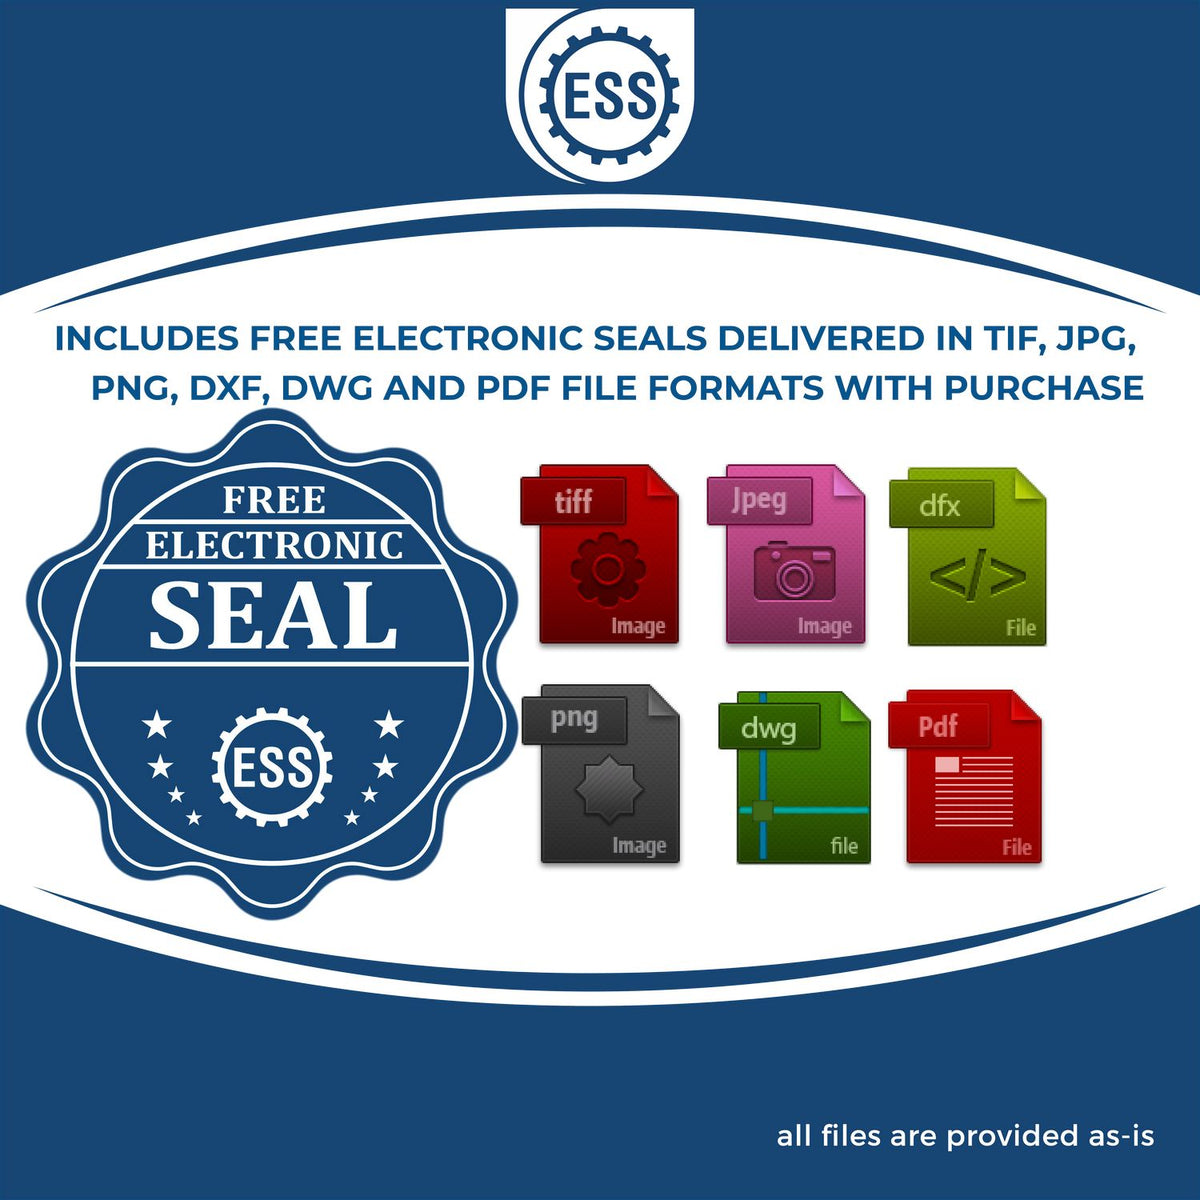 An infographic for the free electronic seal for the Gift New Hampshire Land Surveyor Seal illustrating the different file type icons such as DXF, DWG, TIF, JPG and PNG.